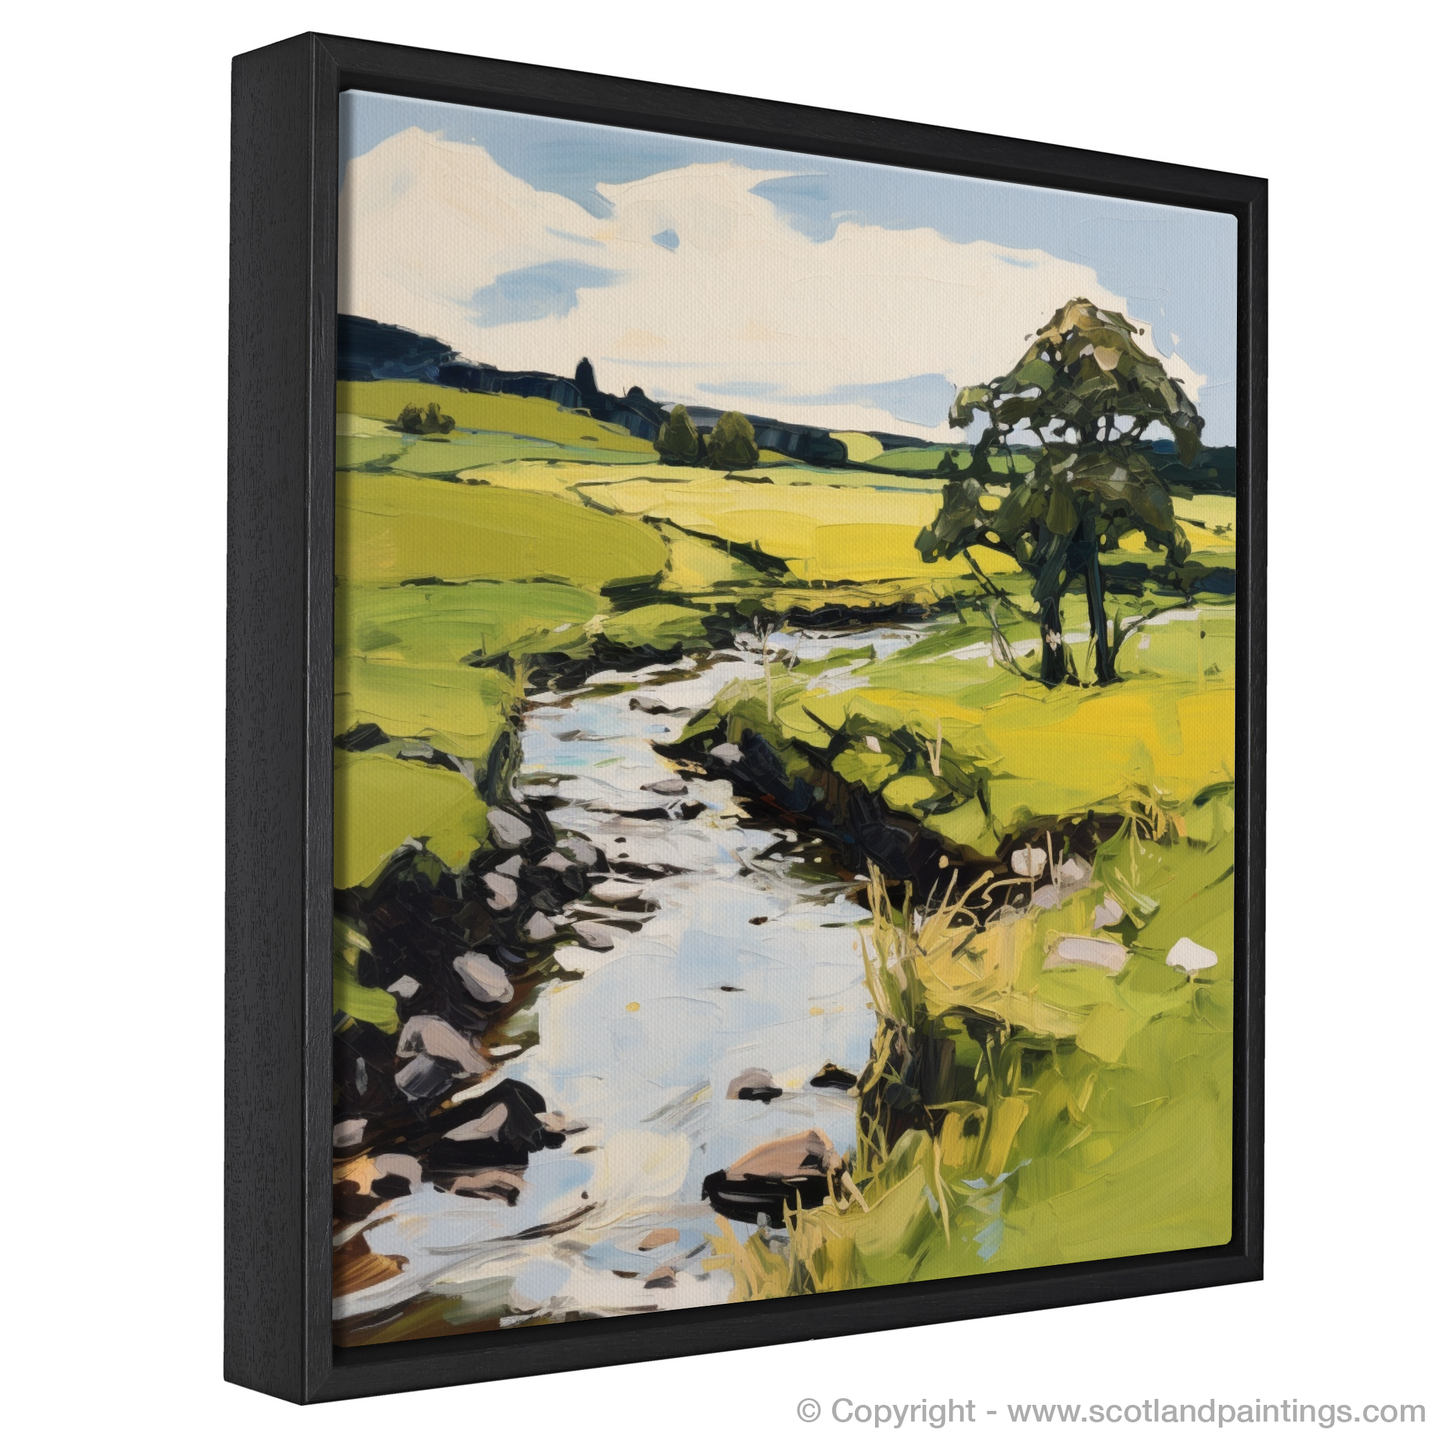 Painting and Art Print of River Deveron, Aberdeenshire in summer entitled "Summer Serenade on the Deveron".